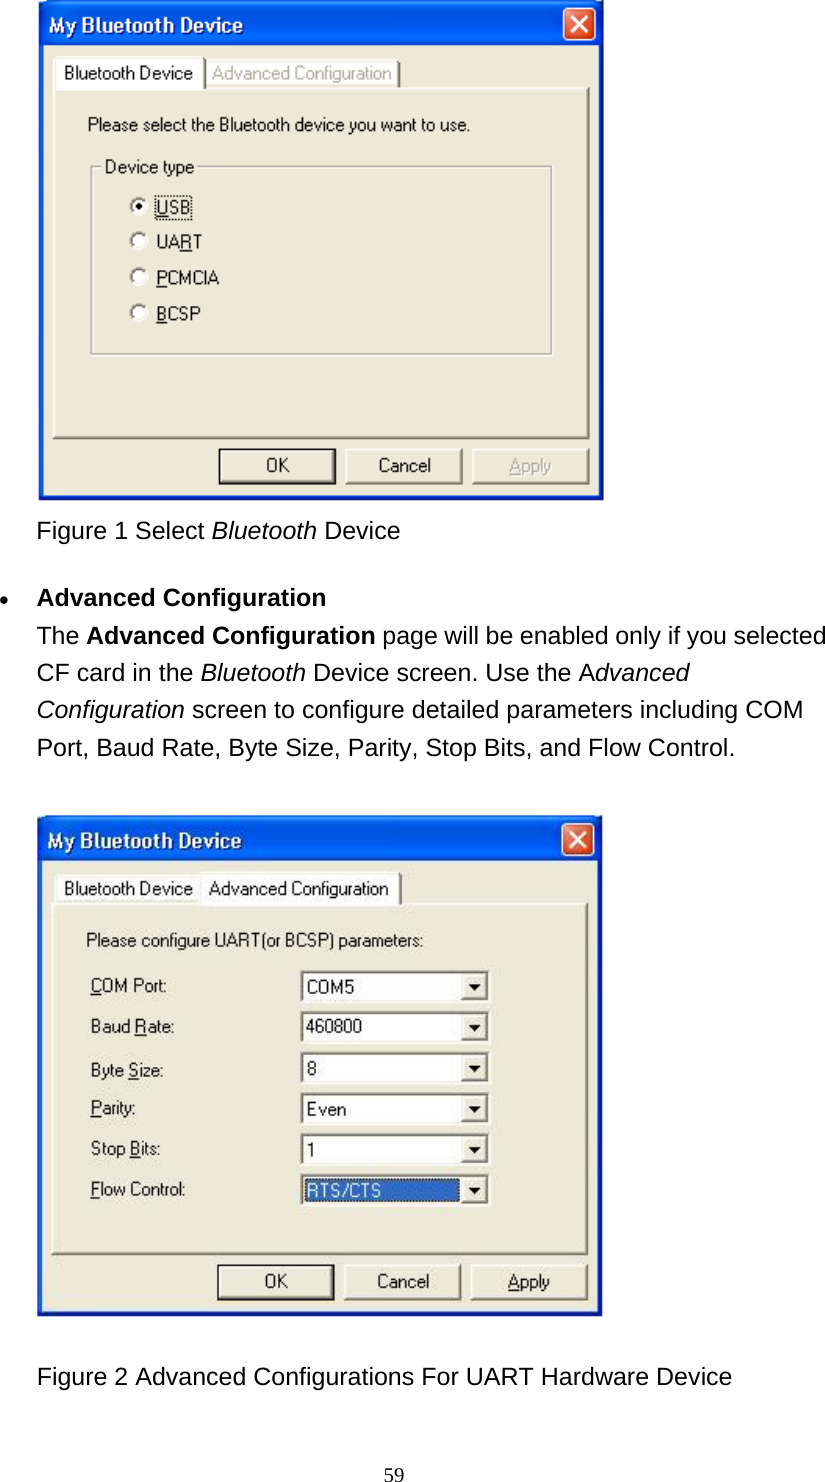   59 Figure 1 Select Bluetooth Device   • Advanced Configuration The Advanced Configuration page will be enabled only if you selected CF card in the Bluetooth Device screen. Use the Advanced Configuration screen to configure detailed parameters including COM Port, Baud Rate, Byte Size, Parity, Stop Bits, and Flow Control.              Figure 2 Advanced Configurations For UART Hardware Device 